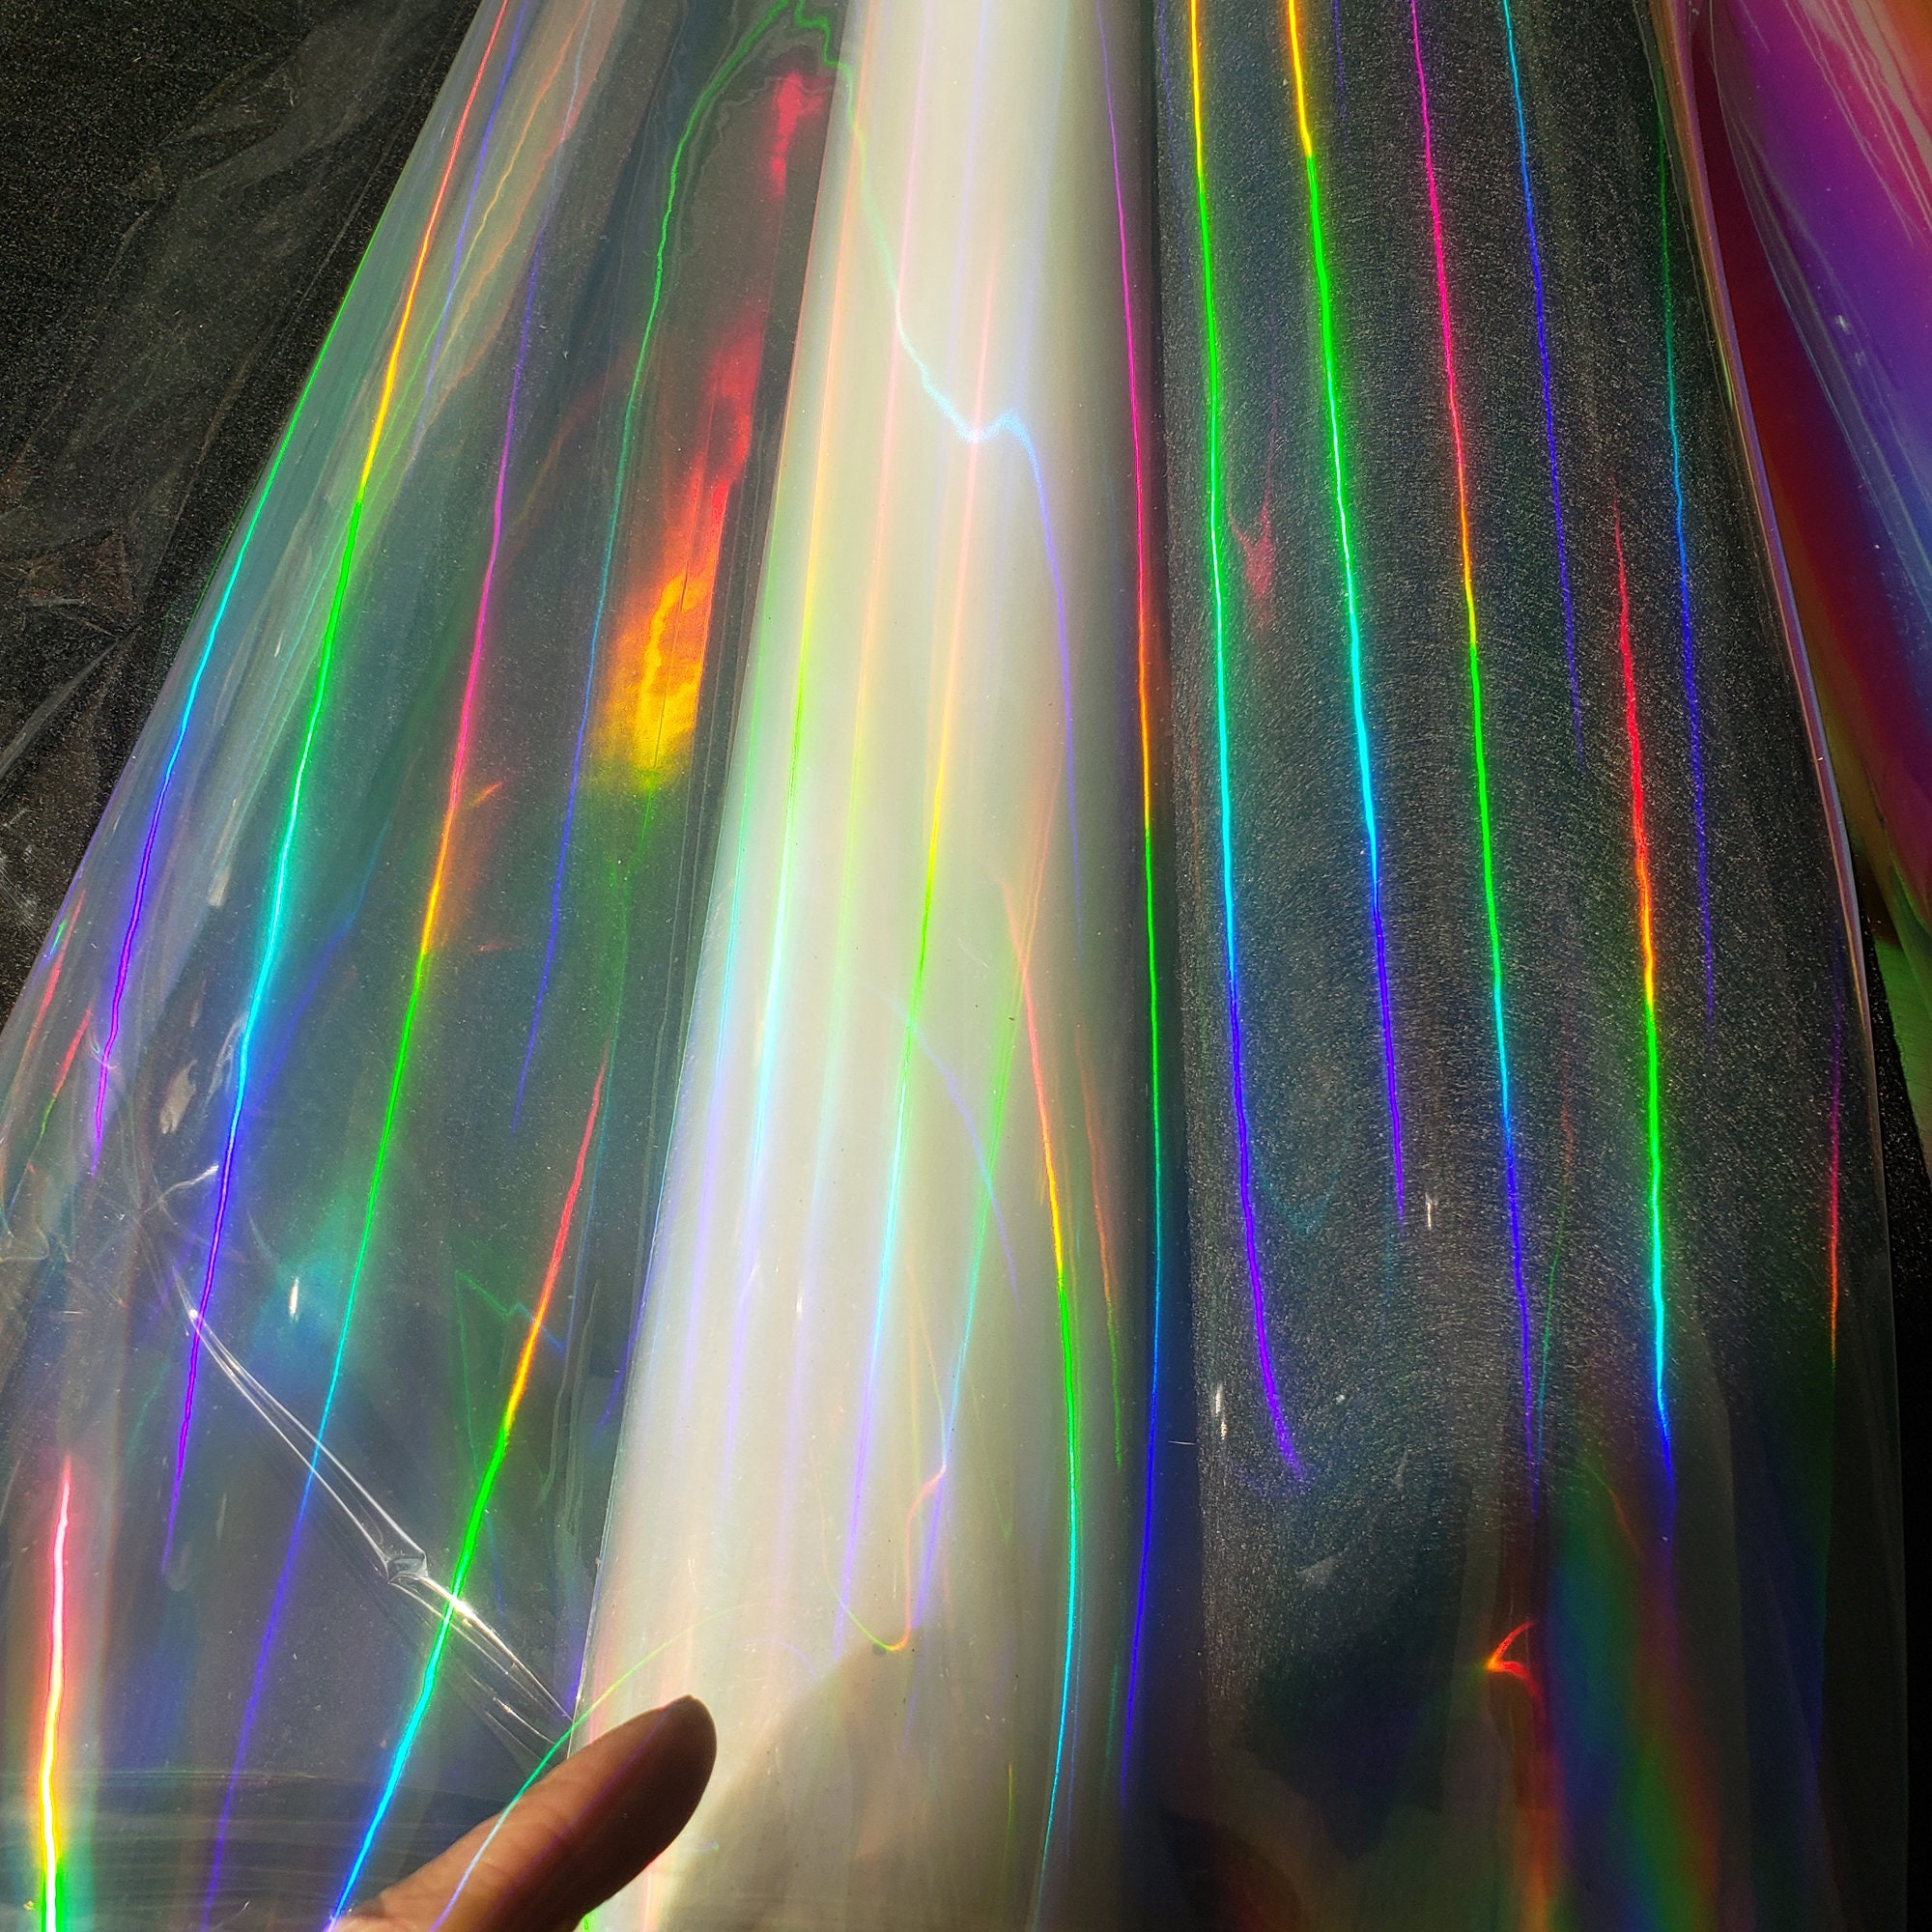 10 Pieces A4 Holographic Clear PVC Fabric Iridescent Transparent Vinyl  Mirrored Foil Laser Crafts Fabric for Sewing Crafts DIY Bows Jewlery  Making